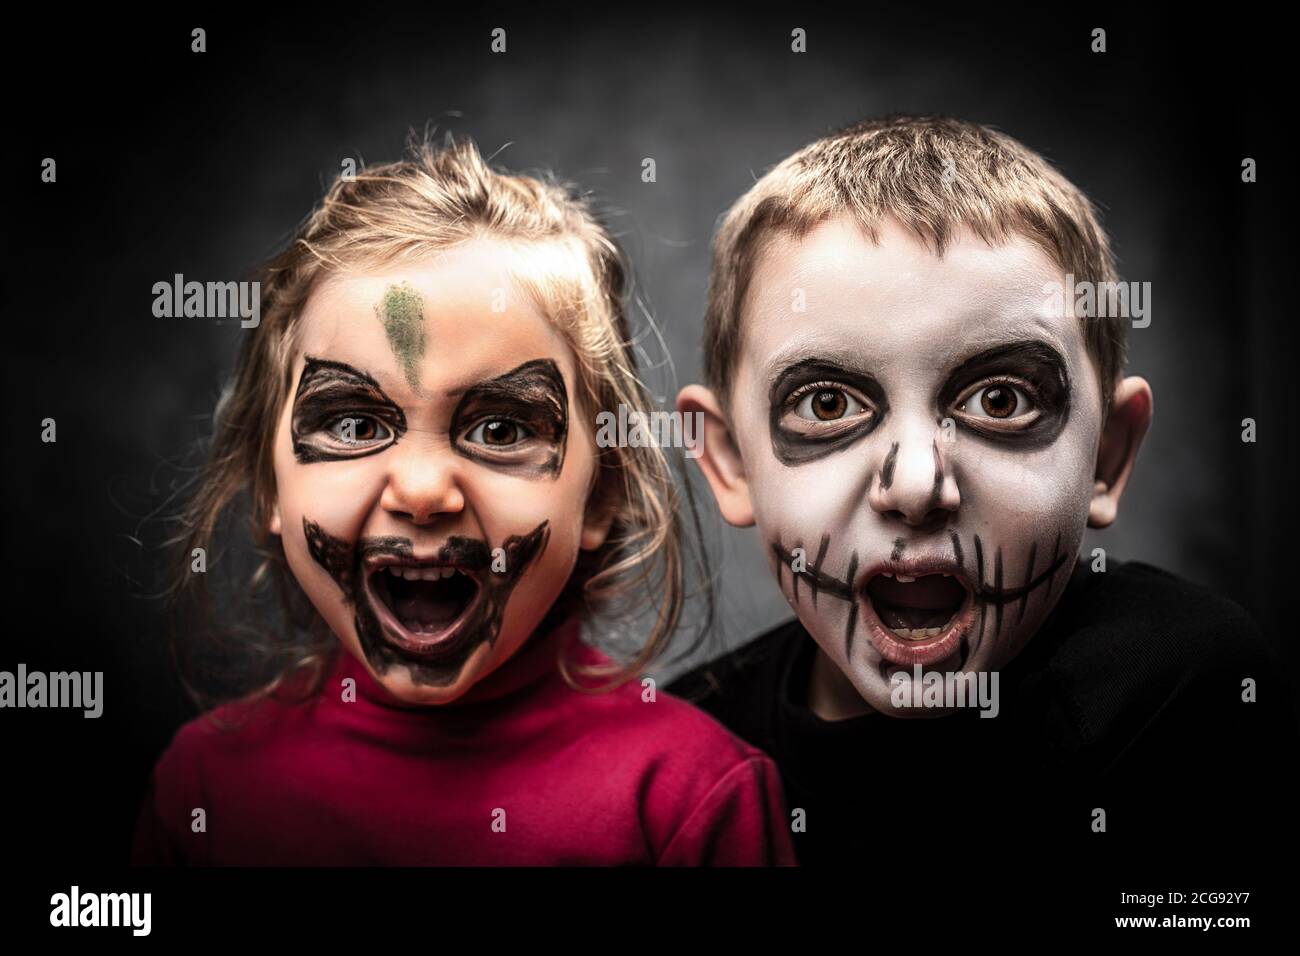 children with face made up for halloween party. studio shot. Stock Photo